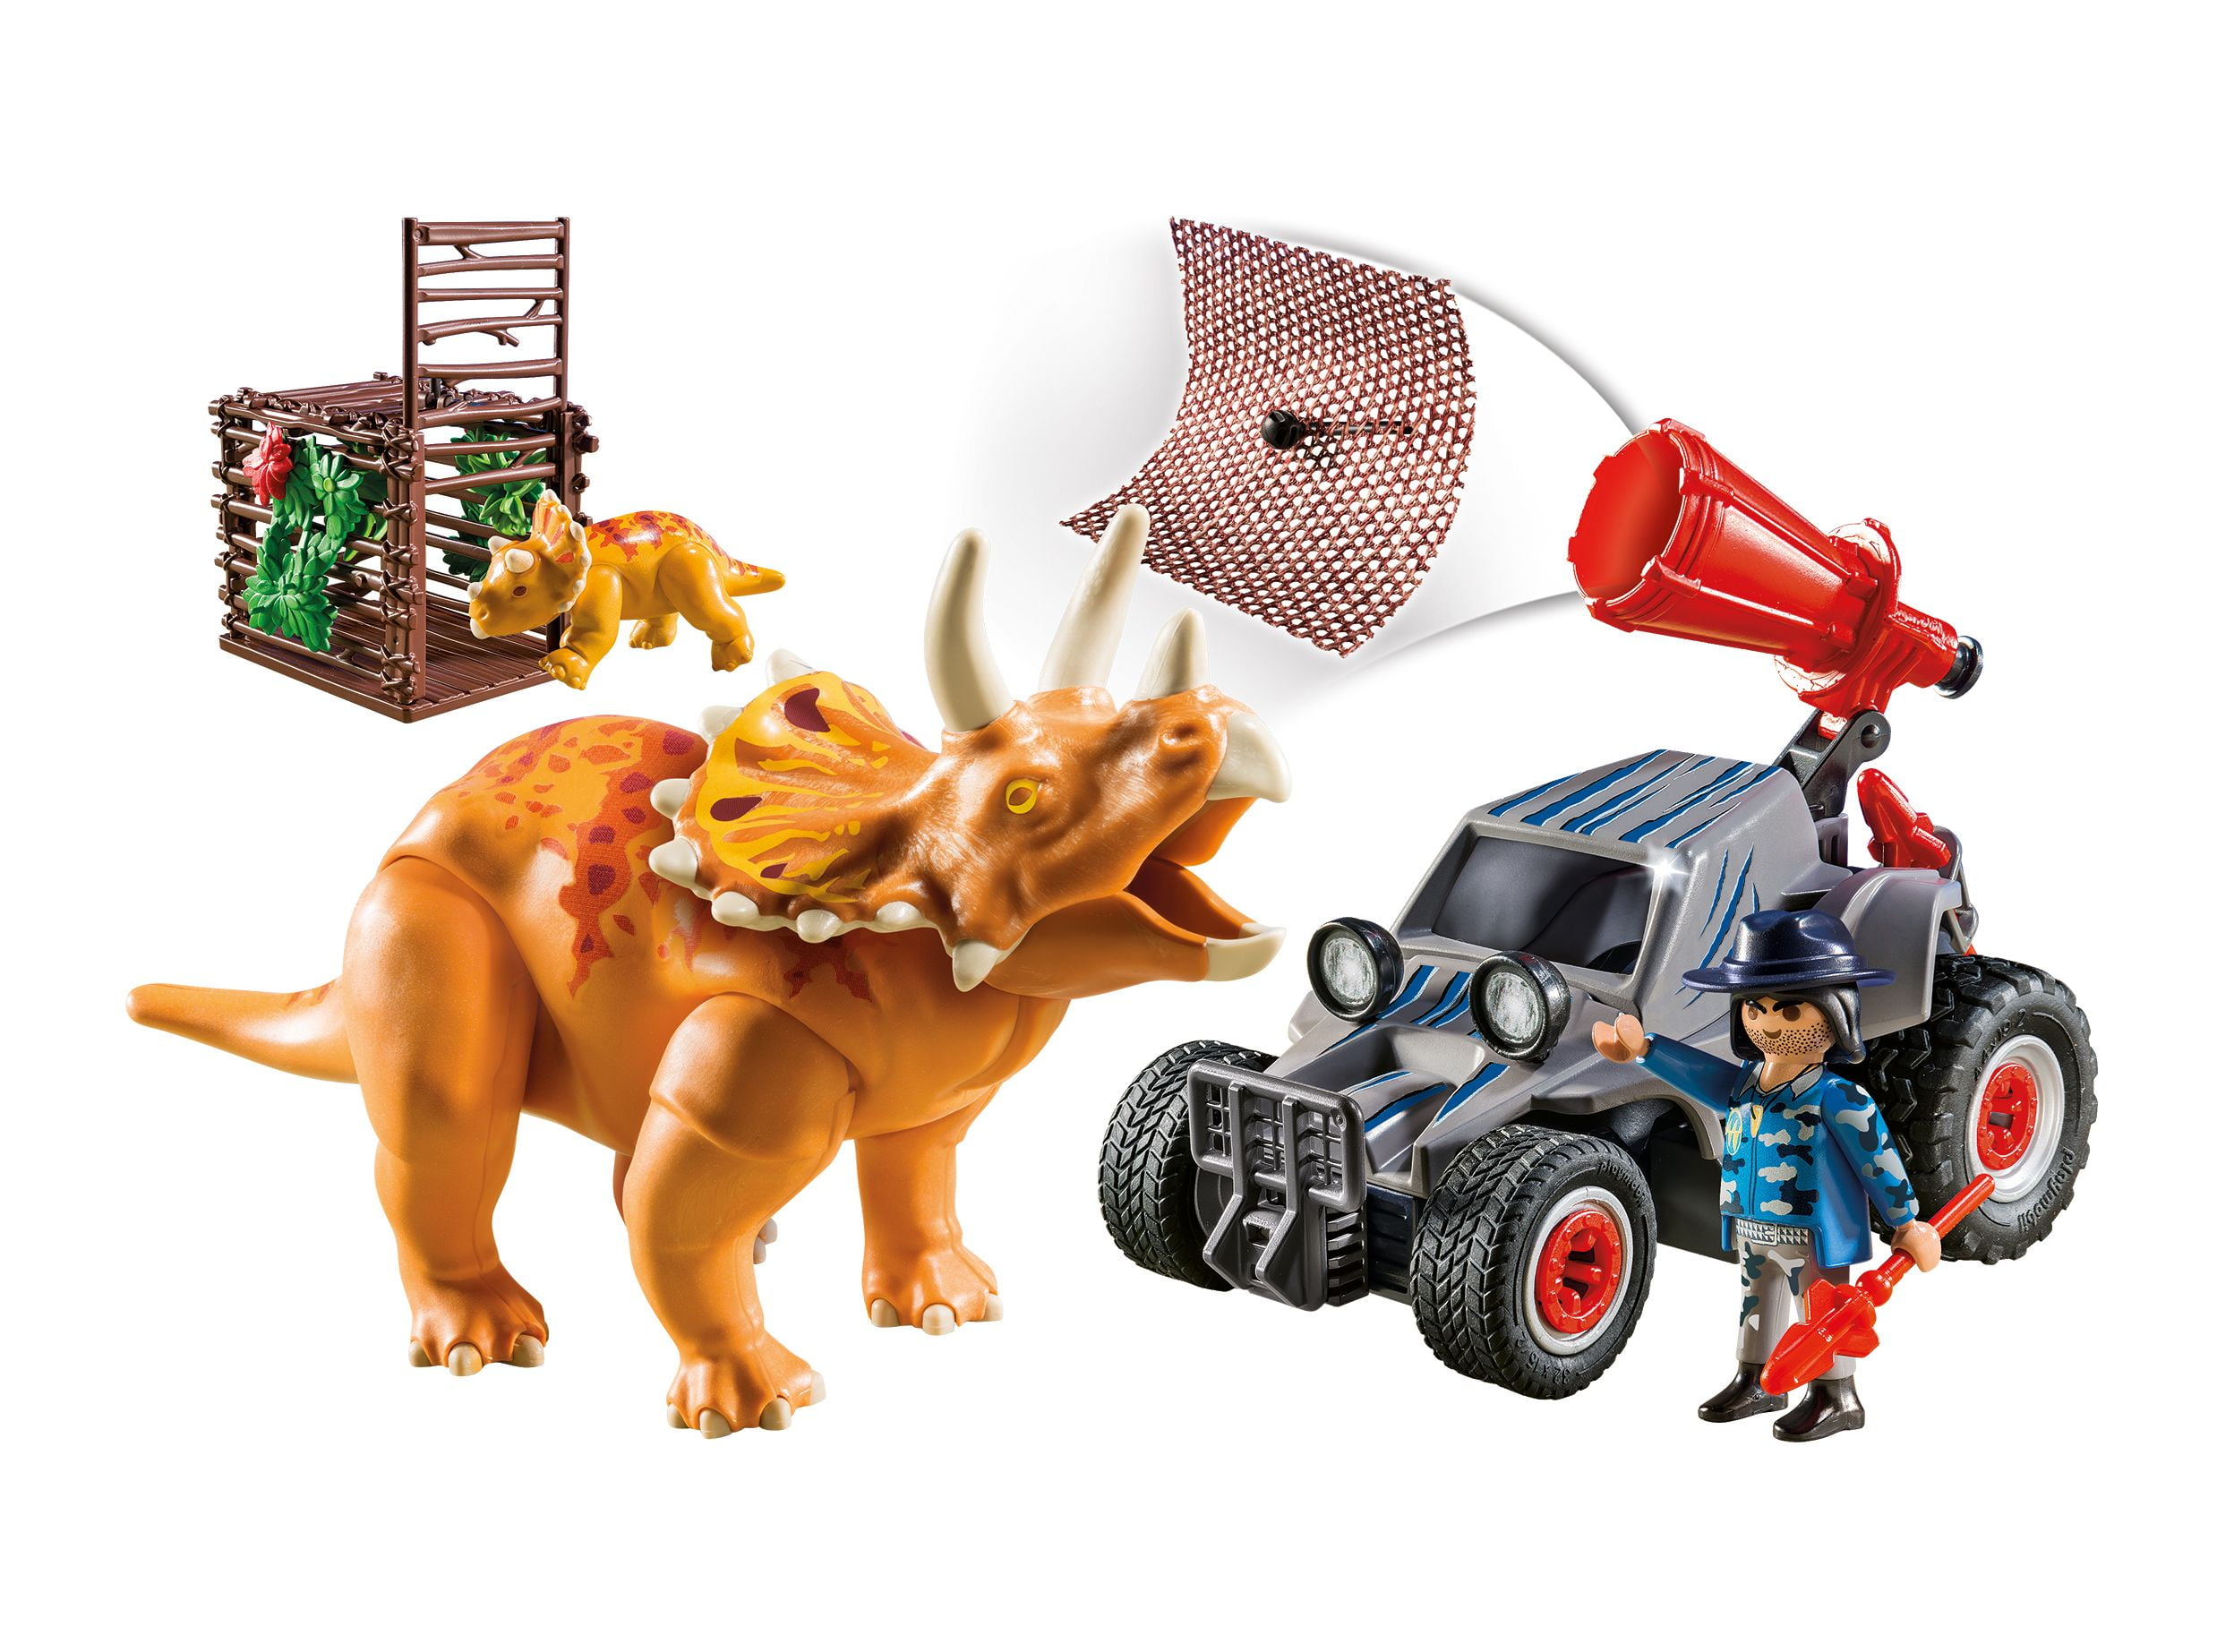 PLAYMOBIL 9434 The Explorers Enemy Quad With Triceratops 59pcs for sale online 